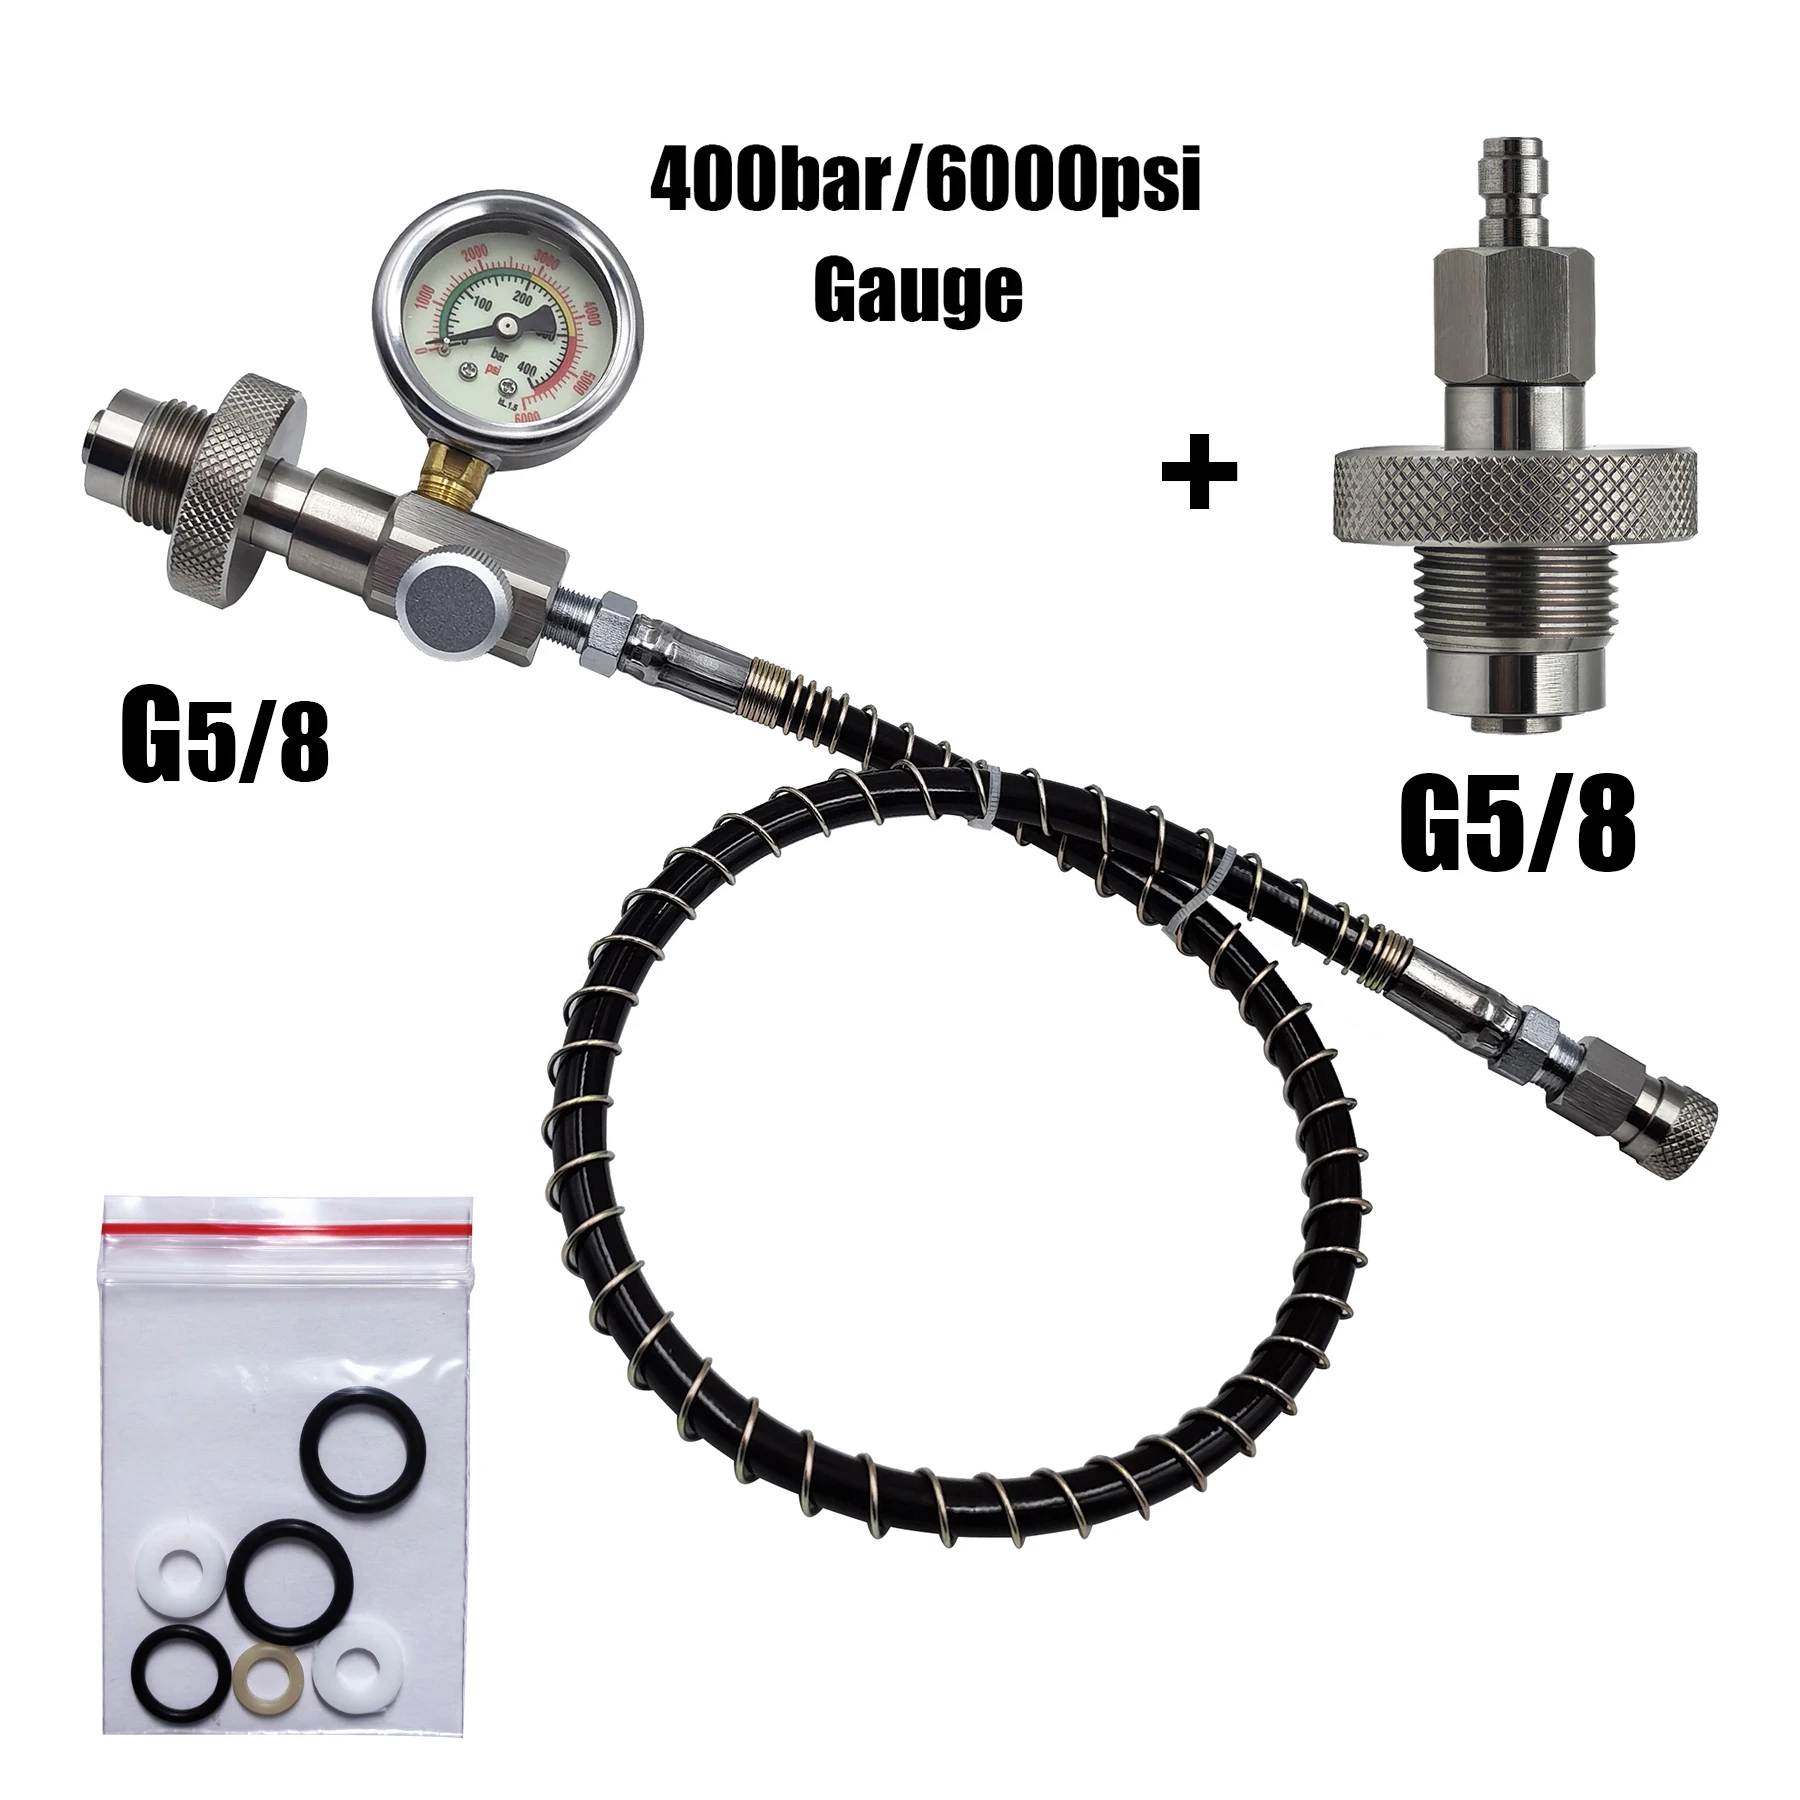 

HP Filling Station Chargeing Adapter DIN Connector HPA Scuba Diving With G5/8 Connector Stainless Steel 6000psi/400bar Gauge